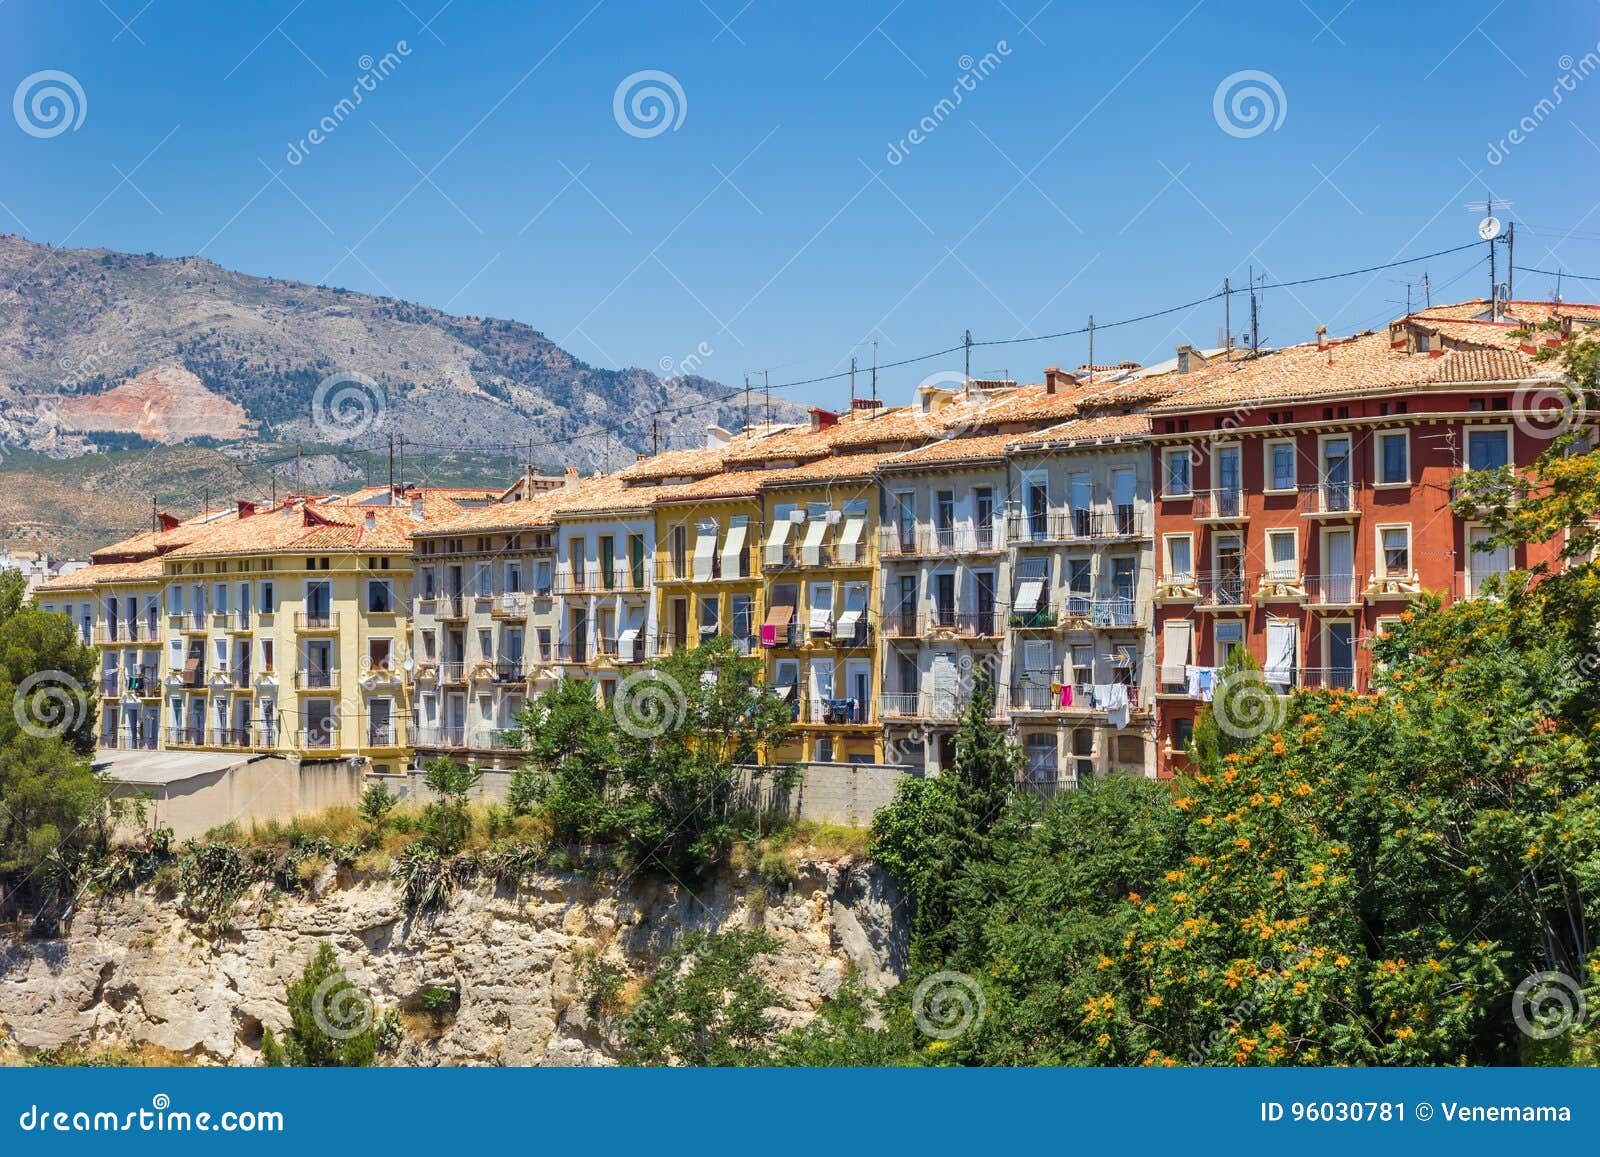 colorful houses in the historic center of alcoy